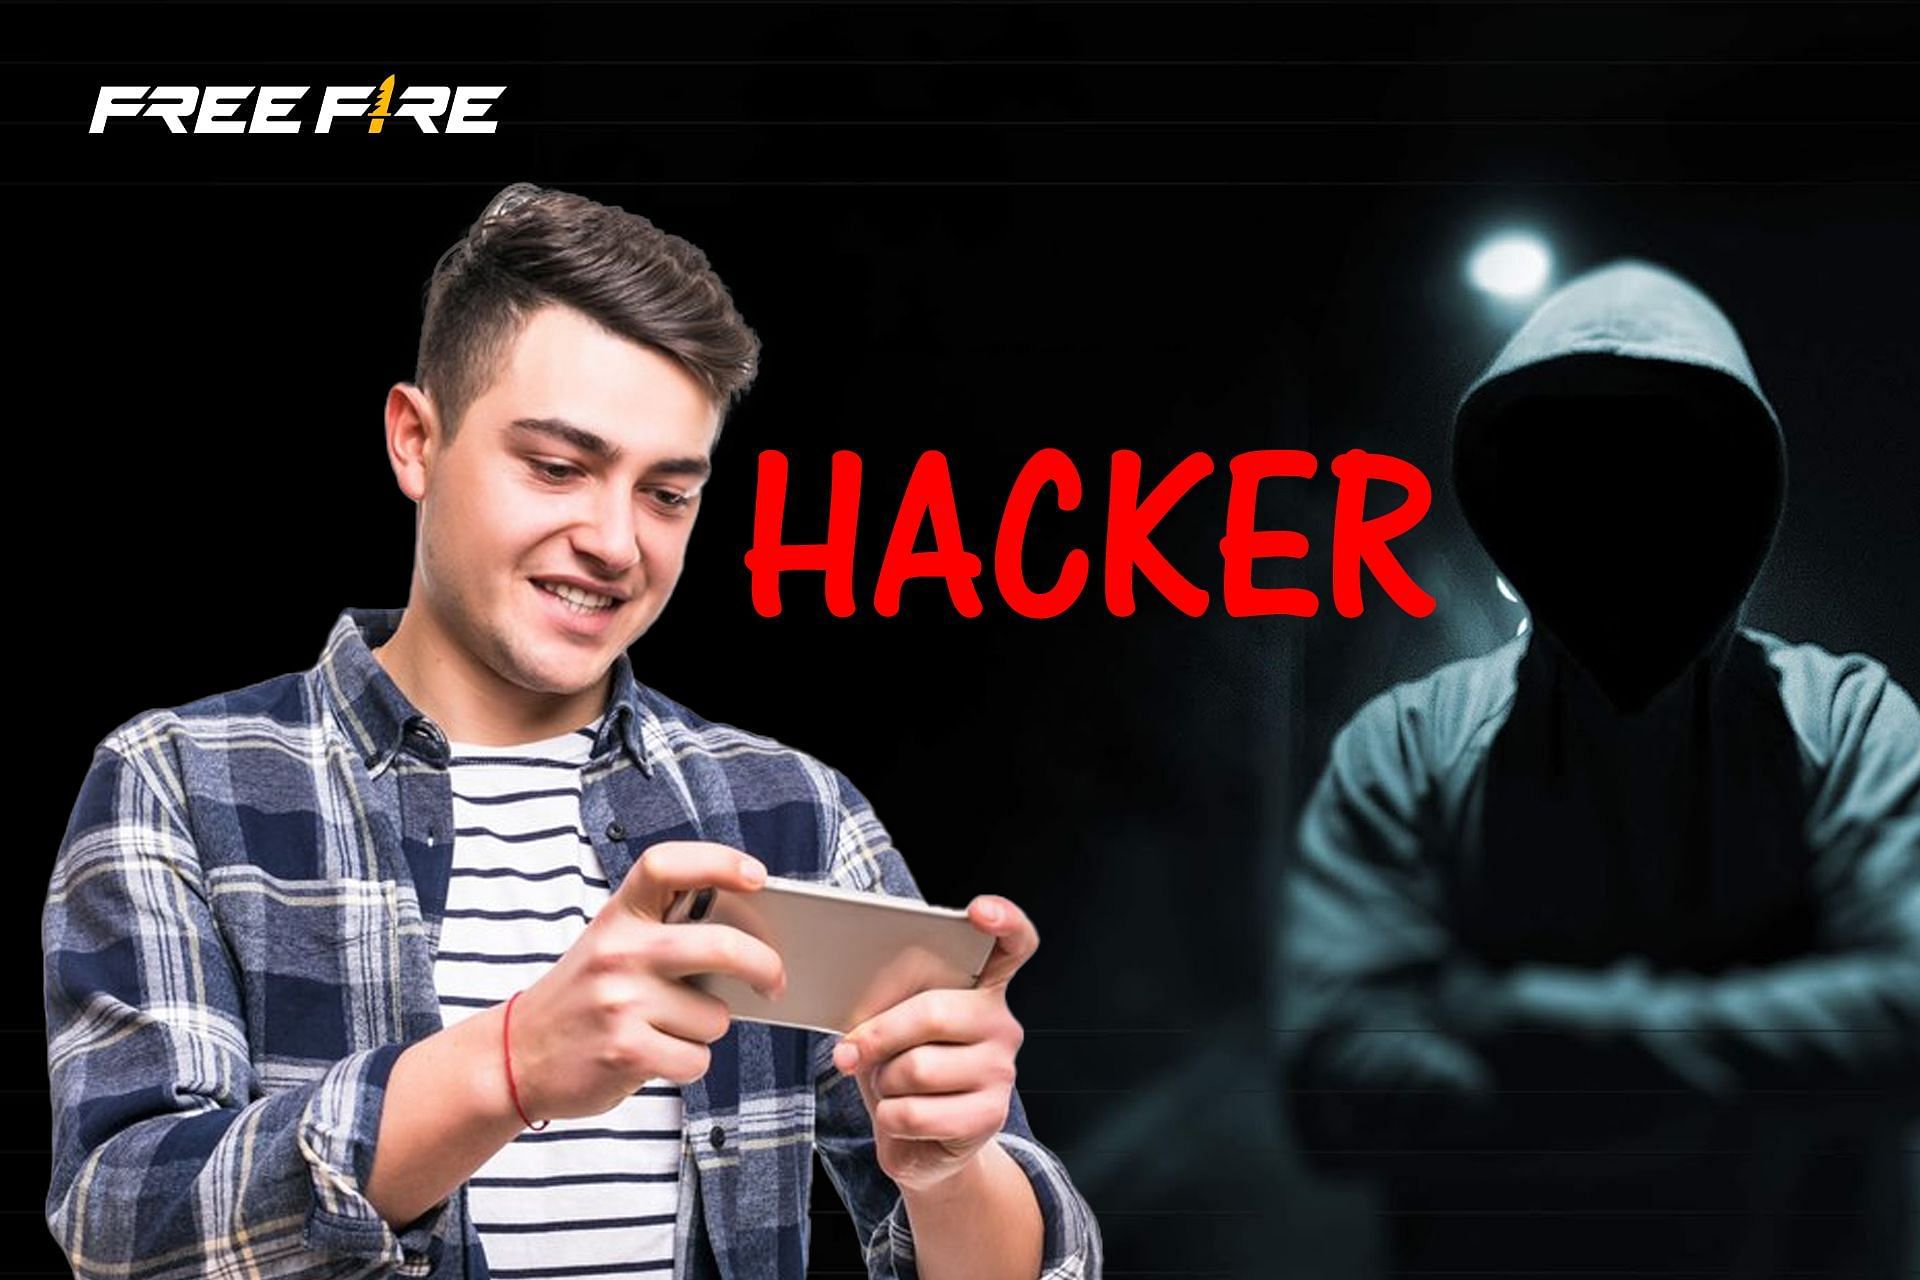 Why Free Fire players should not intentionally play with hackers